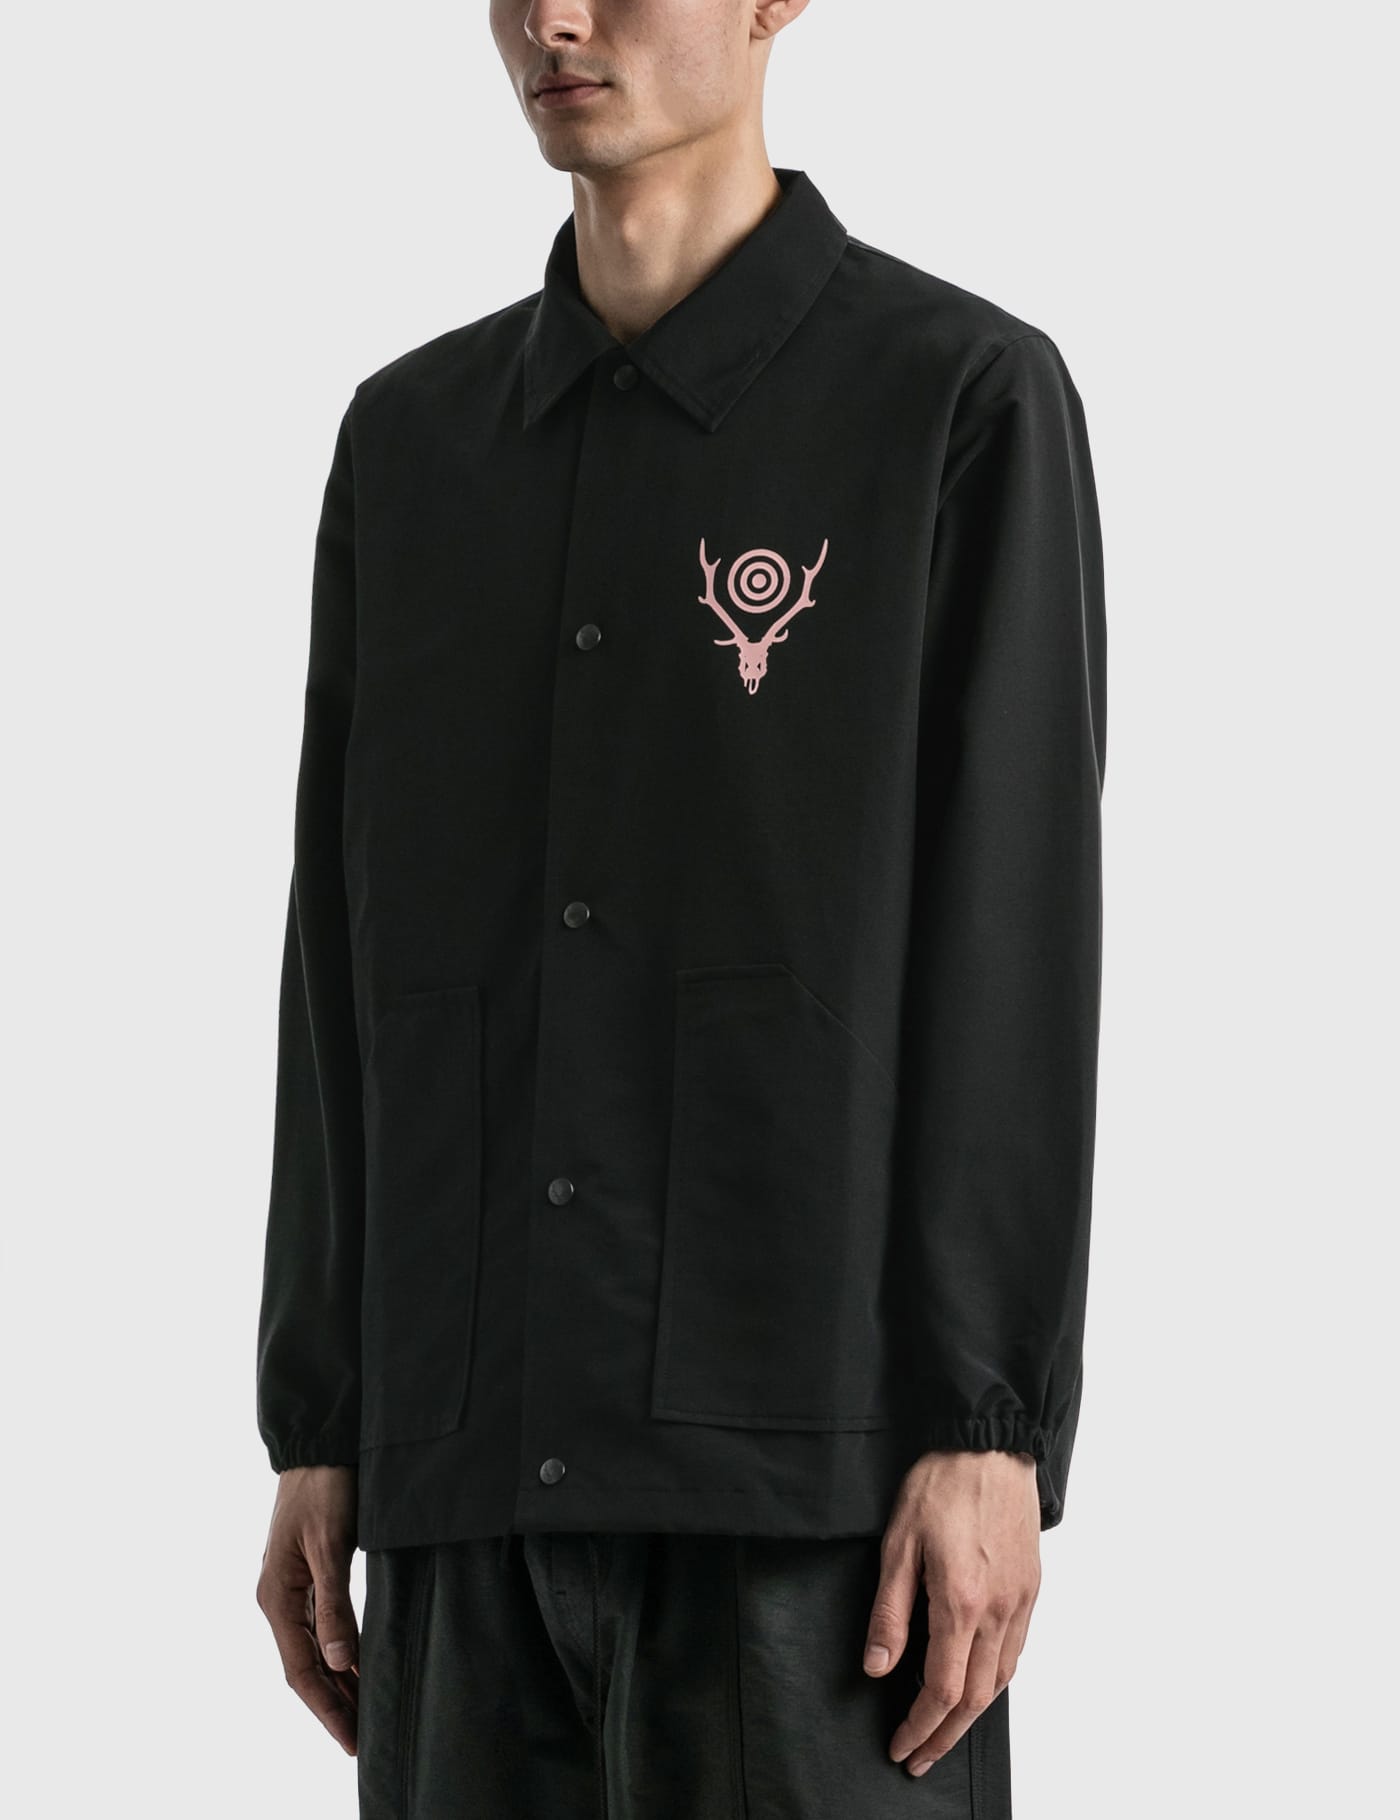 South2 West8 - Oxford Coach Jacket | HBX - Globally Curated